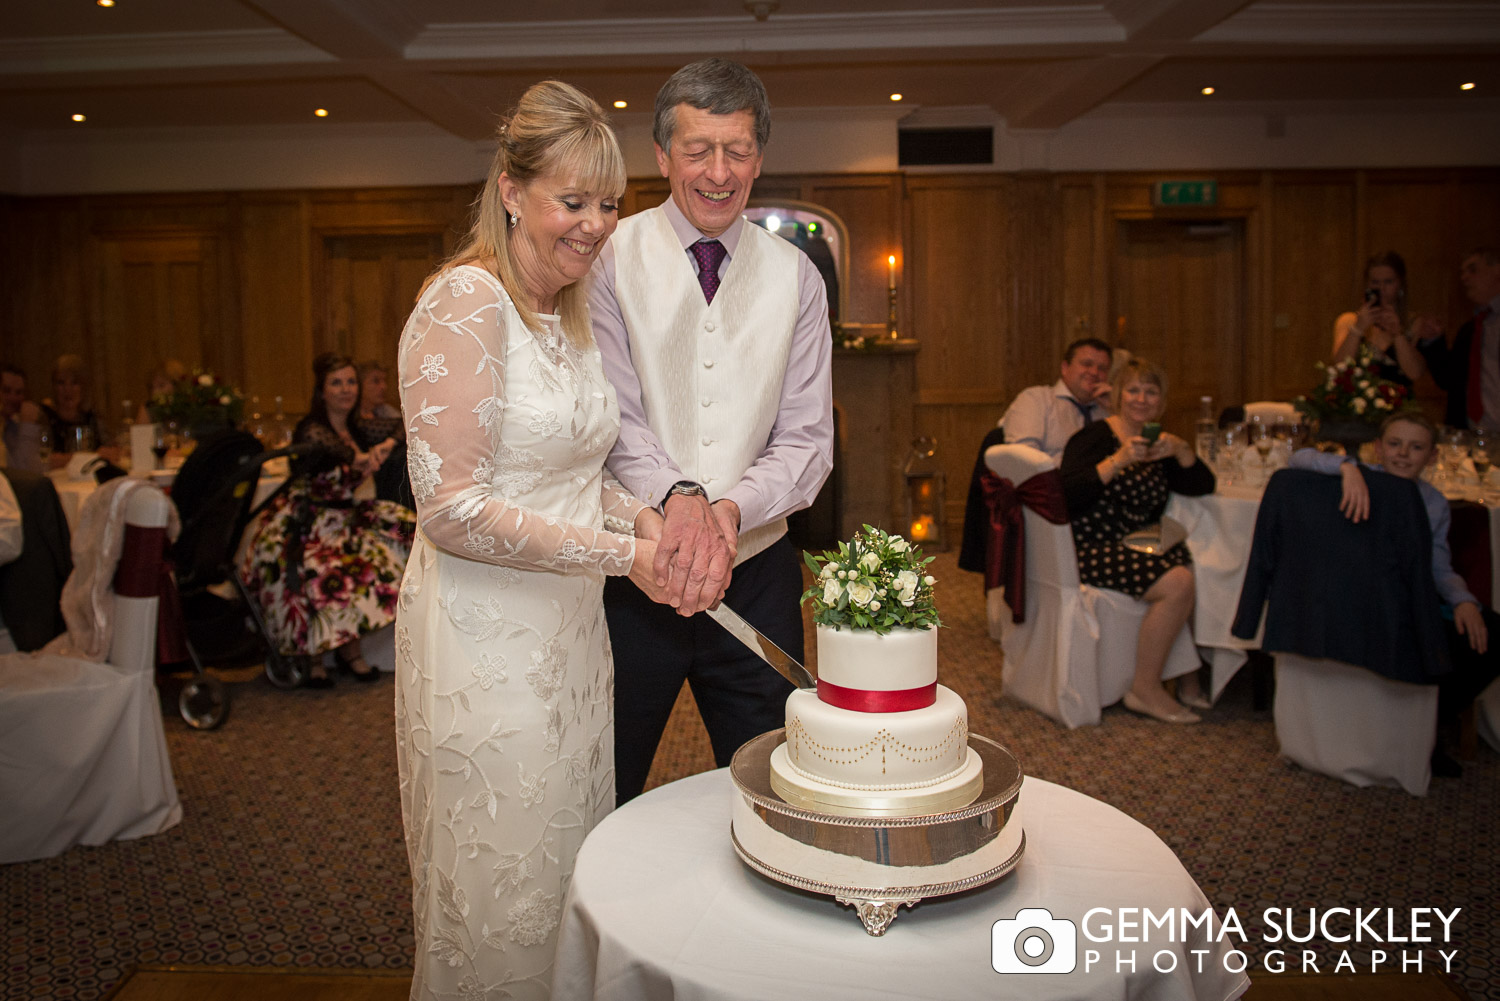 bride and groom cutting the cake wedding cake at Devonshire Arms